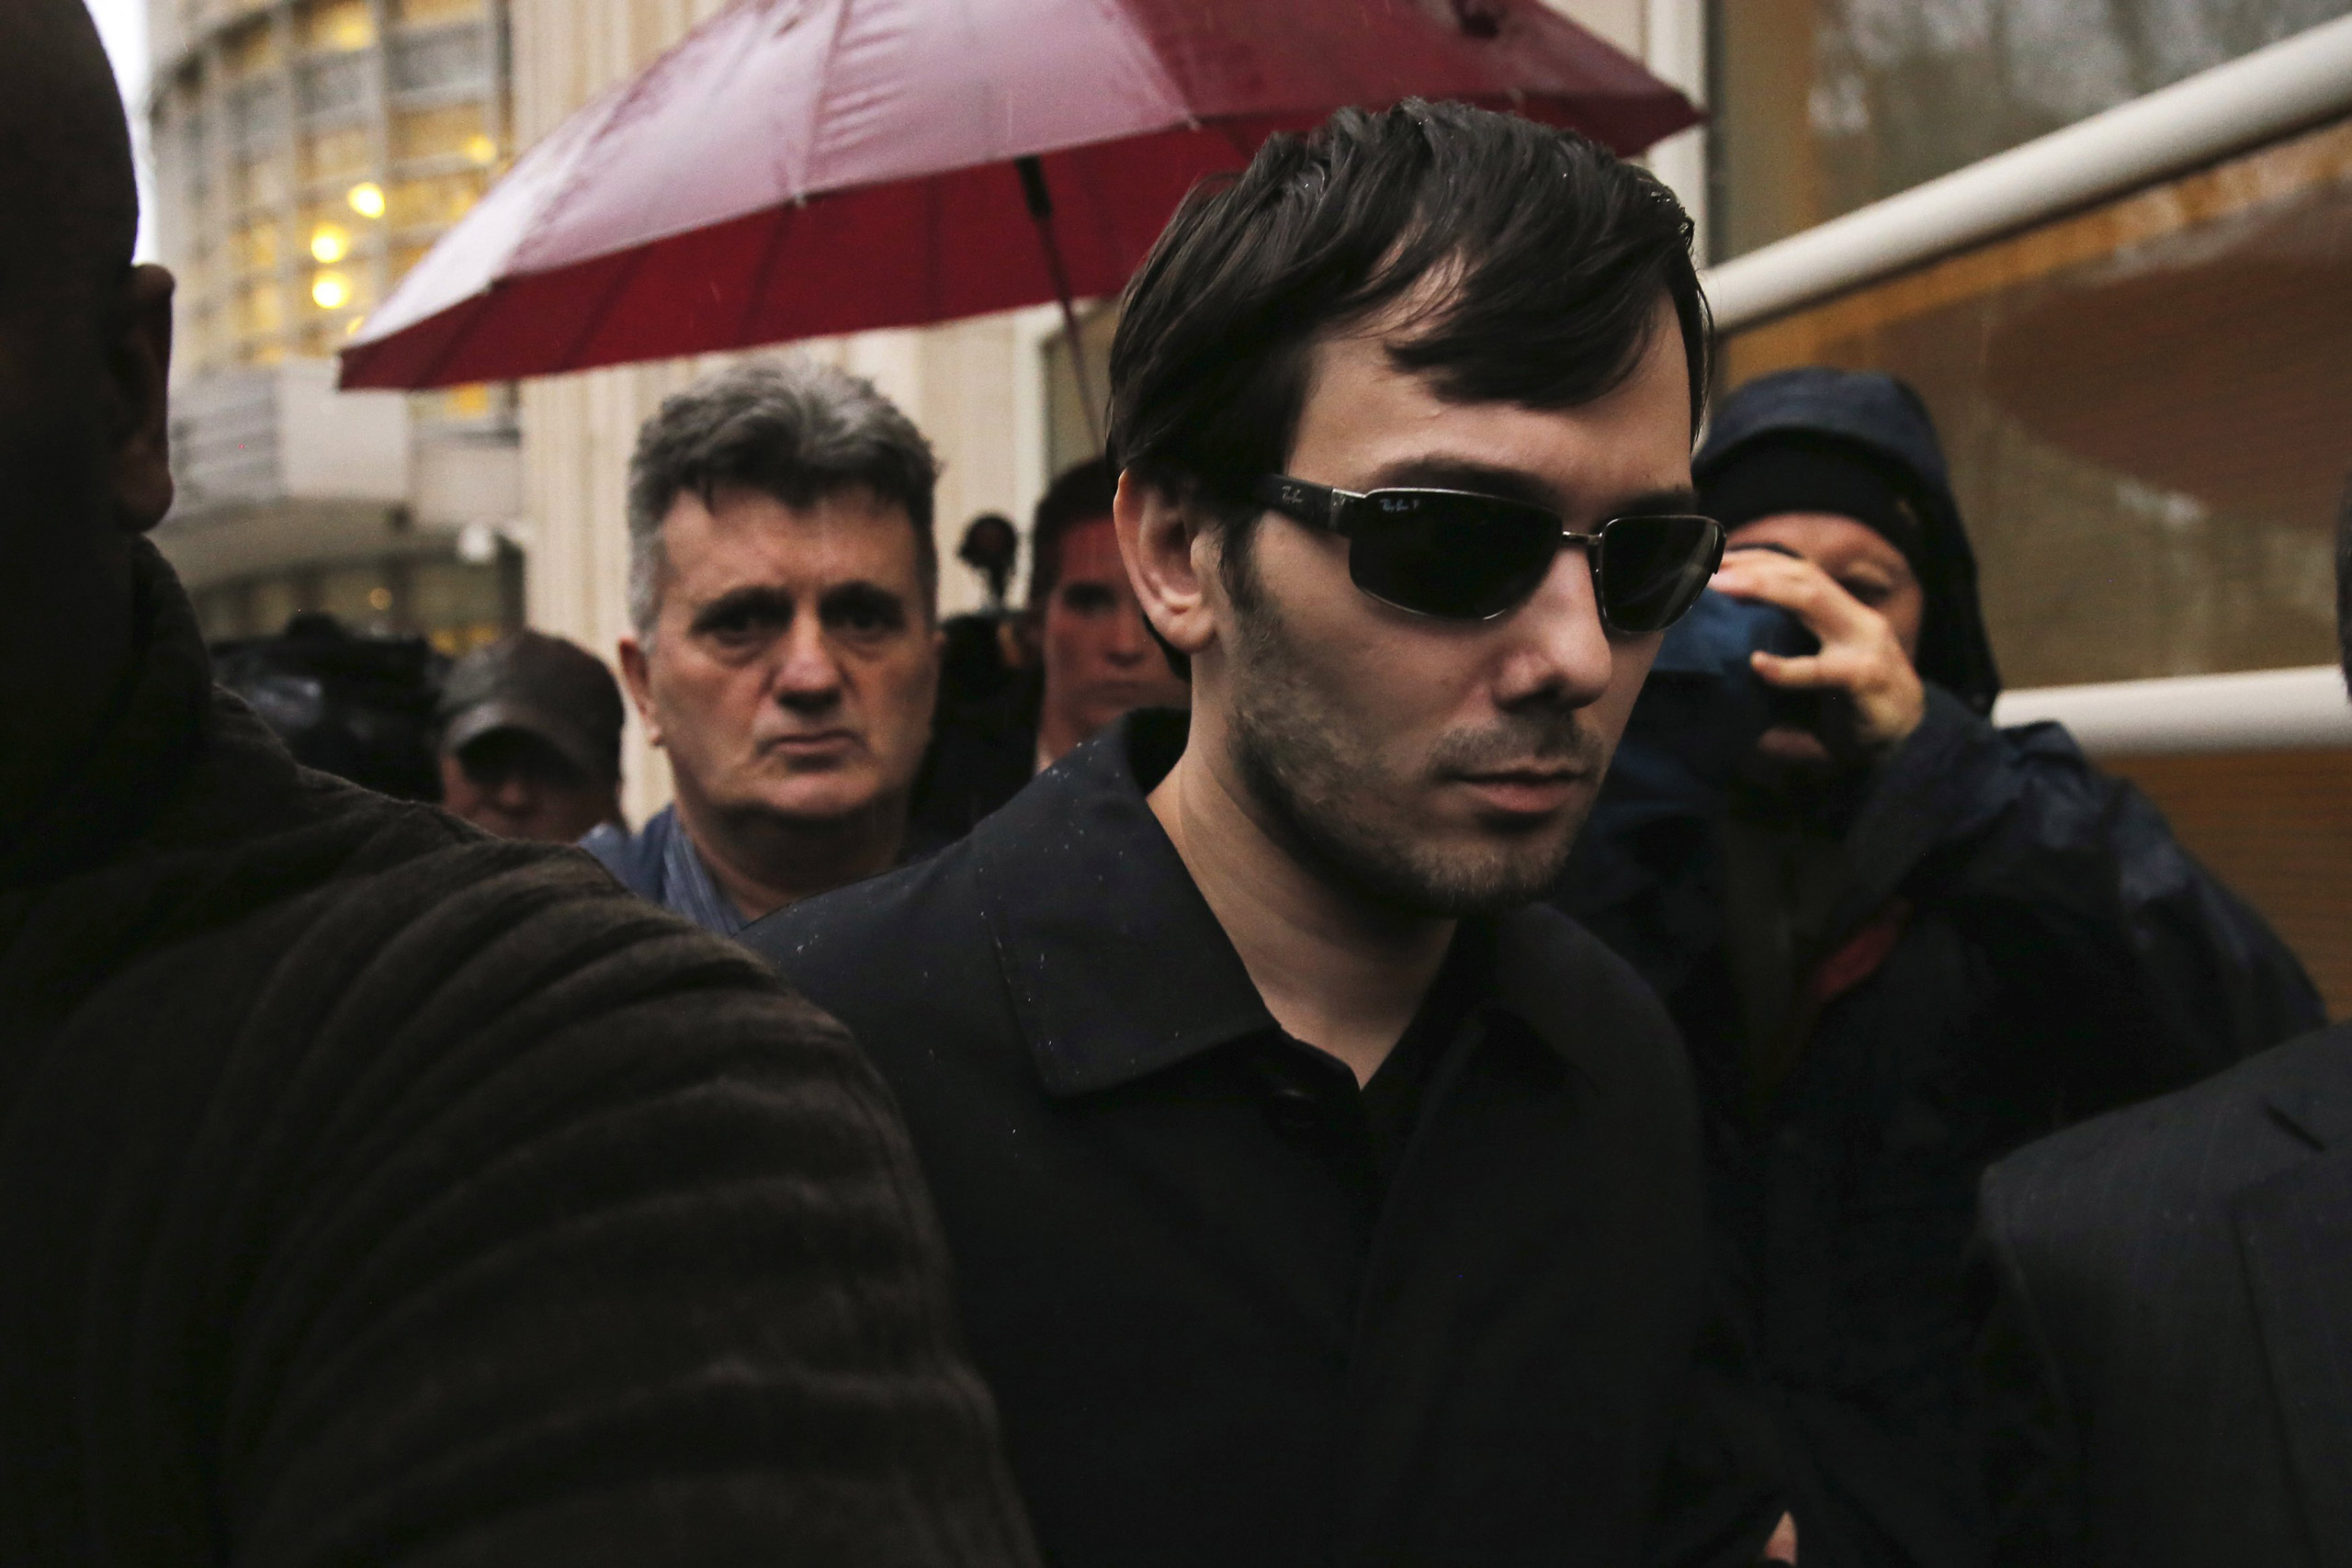 Shkreli, chief executive officer of Turing Pharmaceuticals and KaloBios Pharmaceuticals Inc, departs U.S. Federal Court after an arraignment following his being charged in a federal indictment filed in Brooklyn in New York